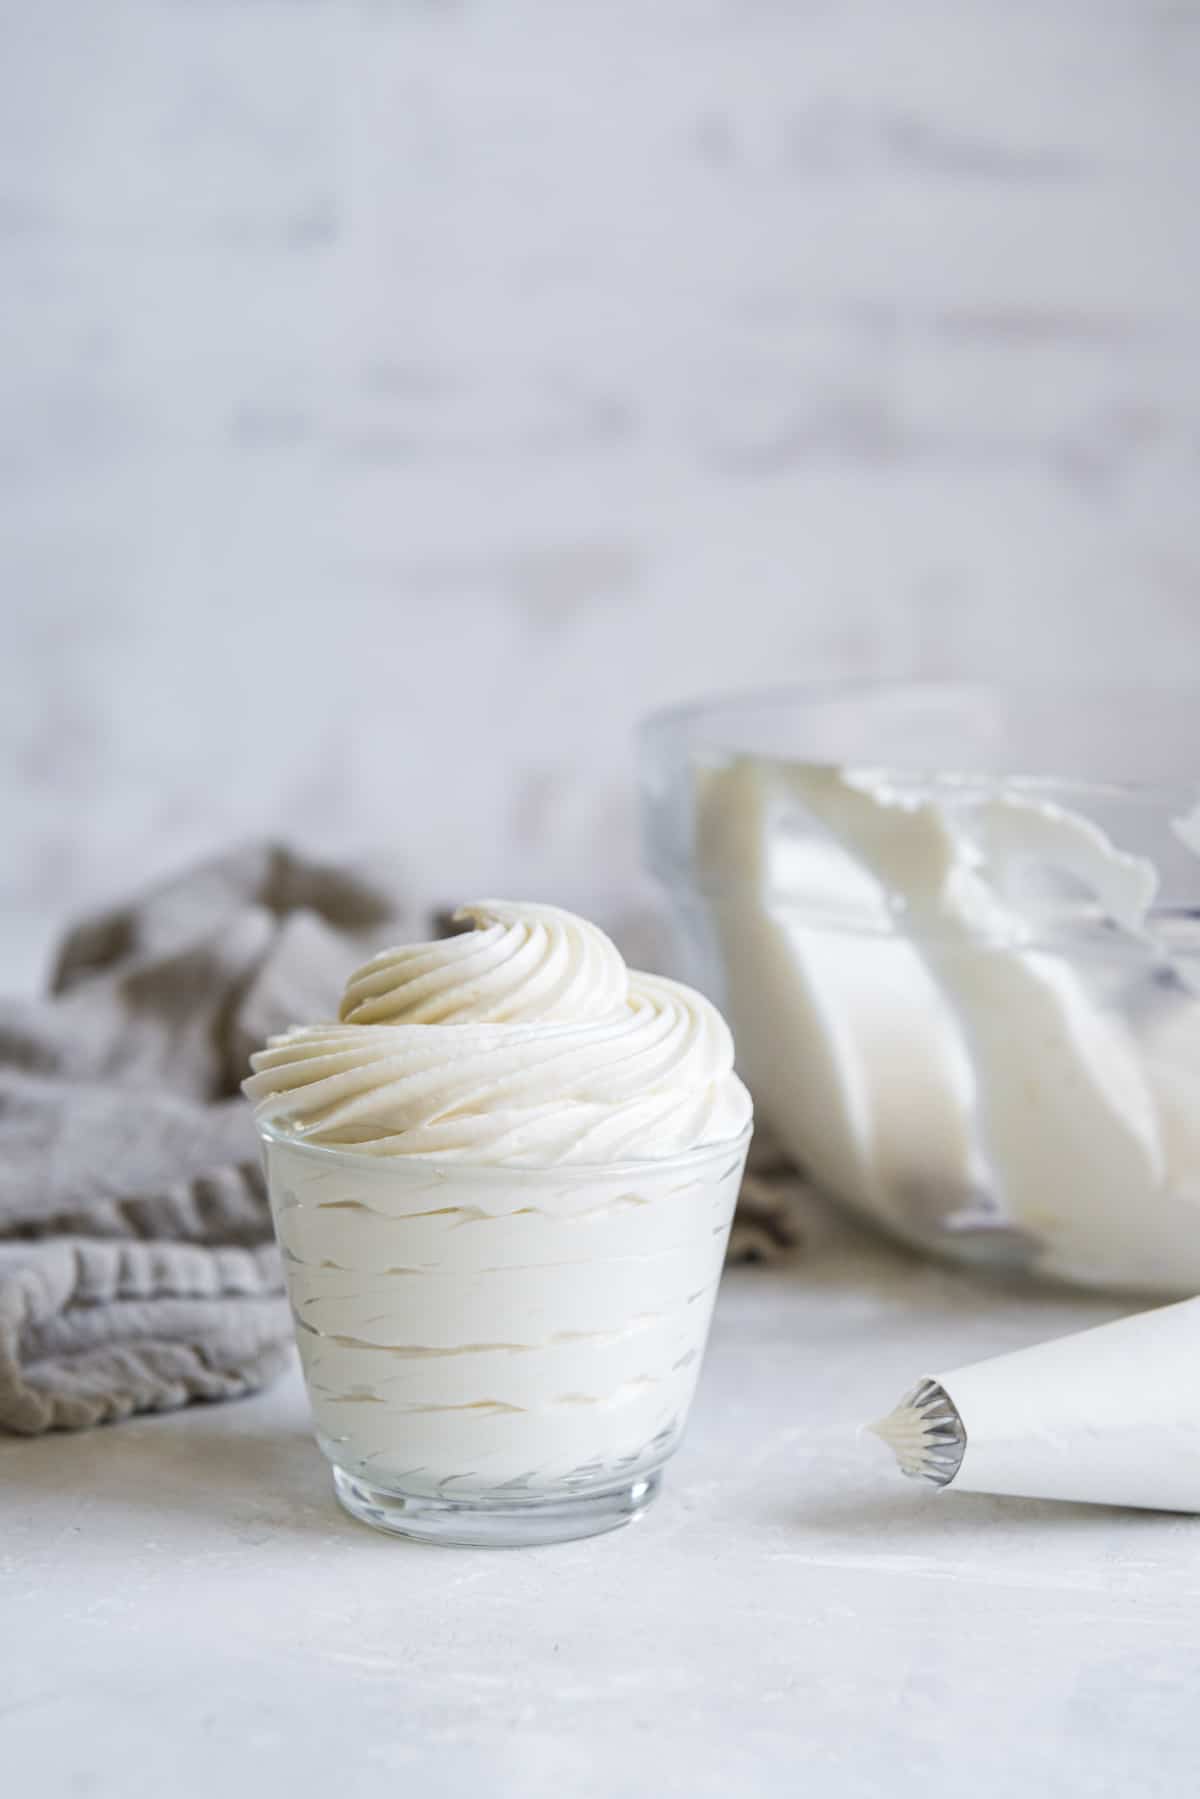 whipped cream cheese frosting piped into a small glass container with a piping bag nearby